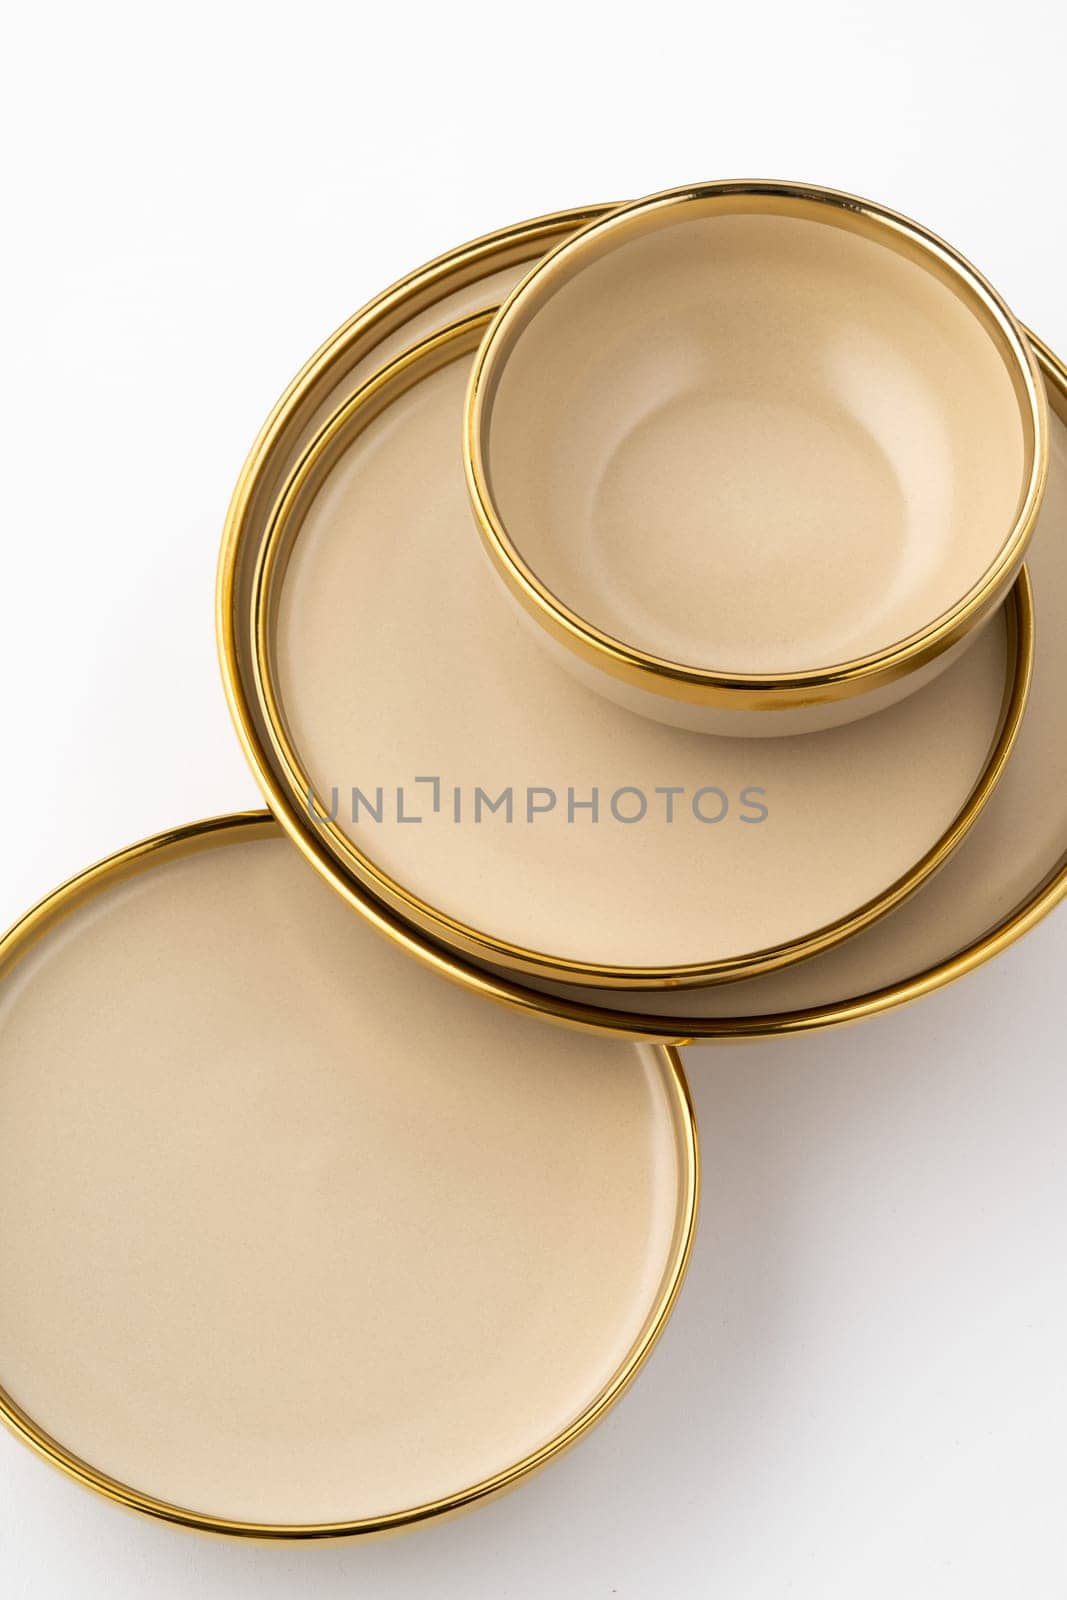 A set of light brown ceramic plate and bowl on a white background. Top view